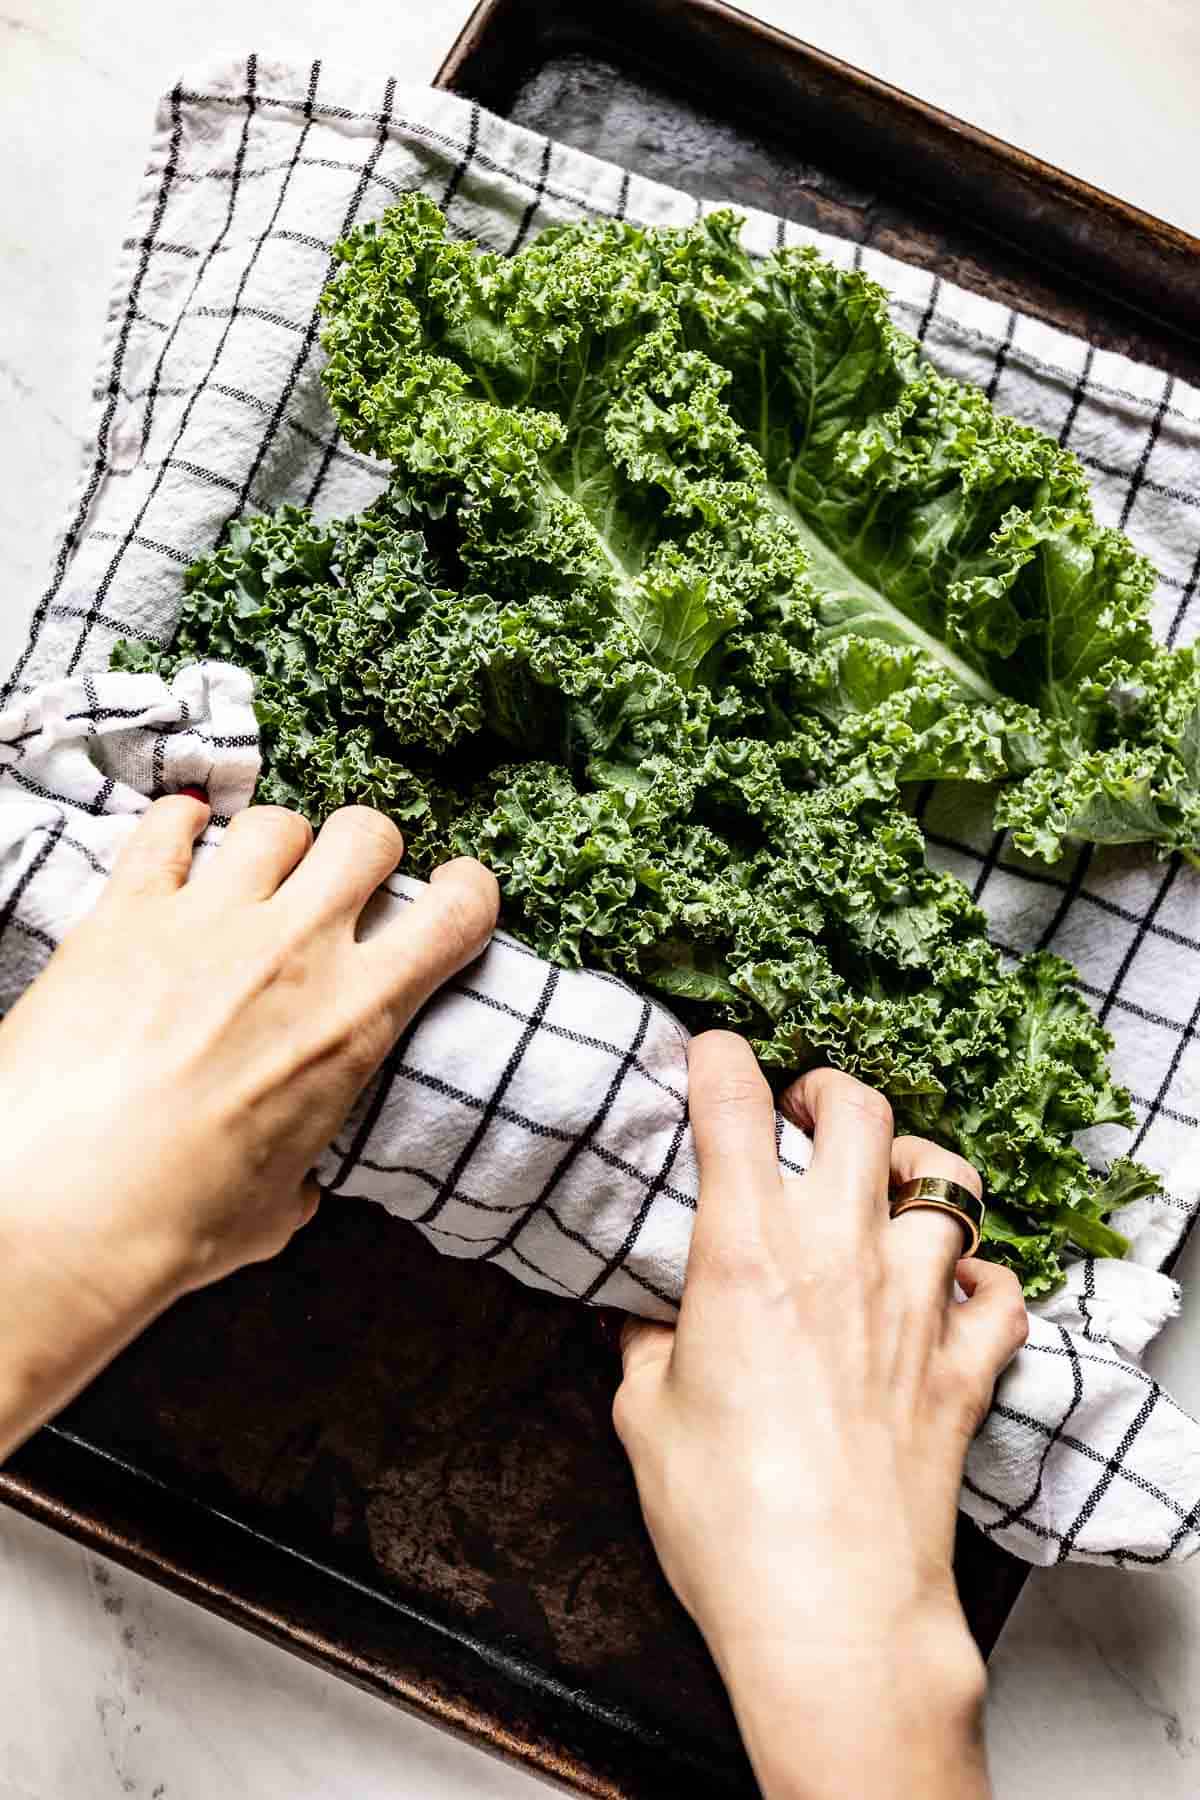 How To Store Kale In The Fridge or Freezer To Keep Fresh Longer